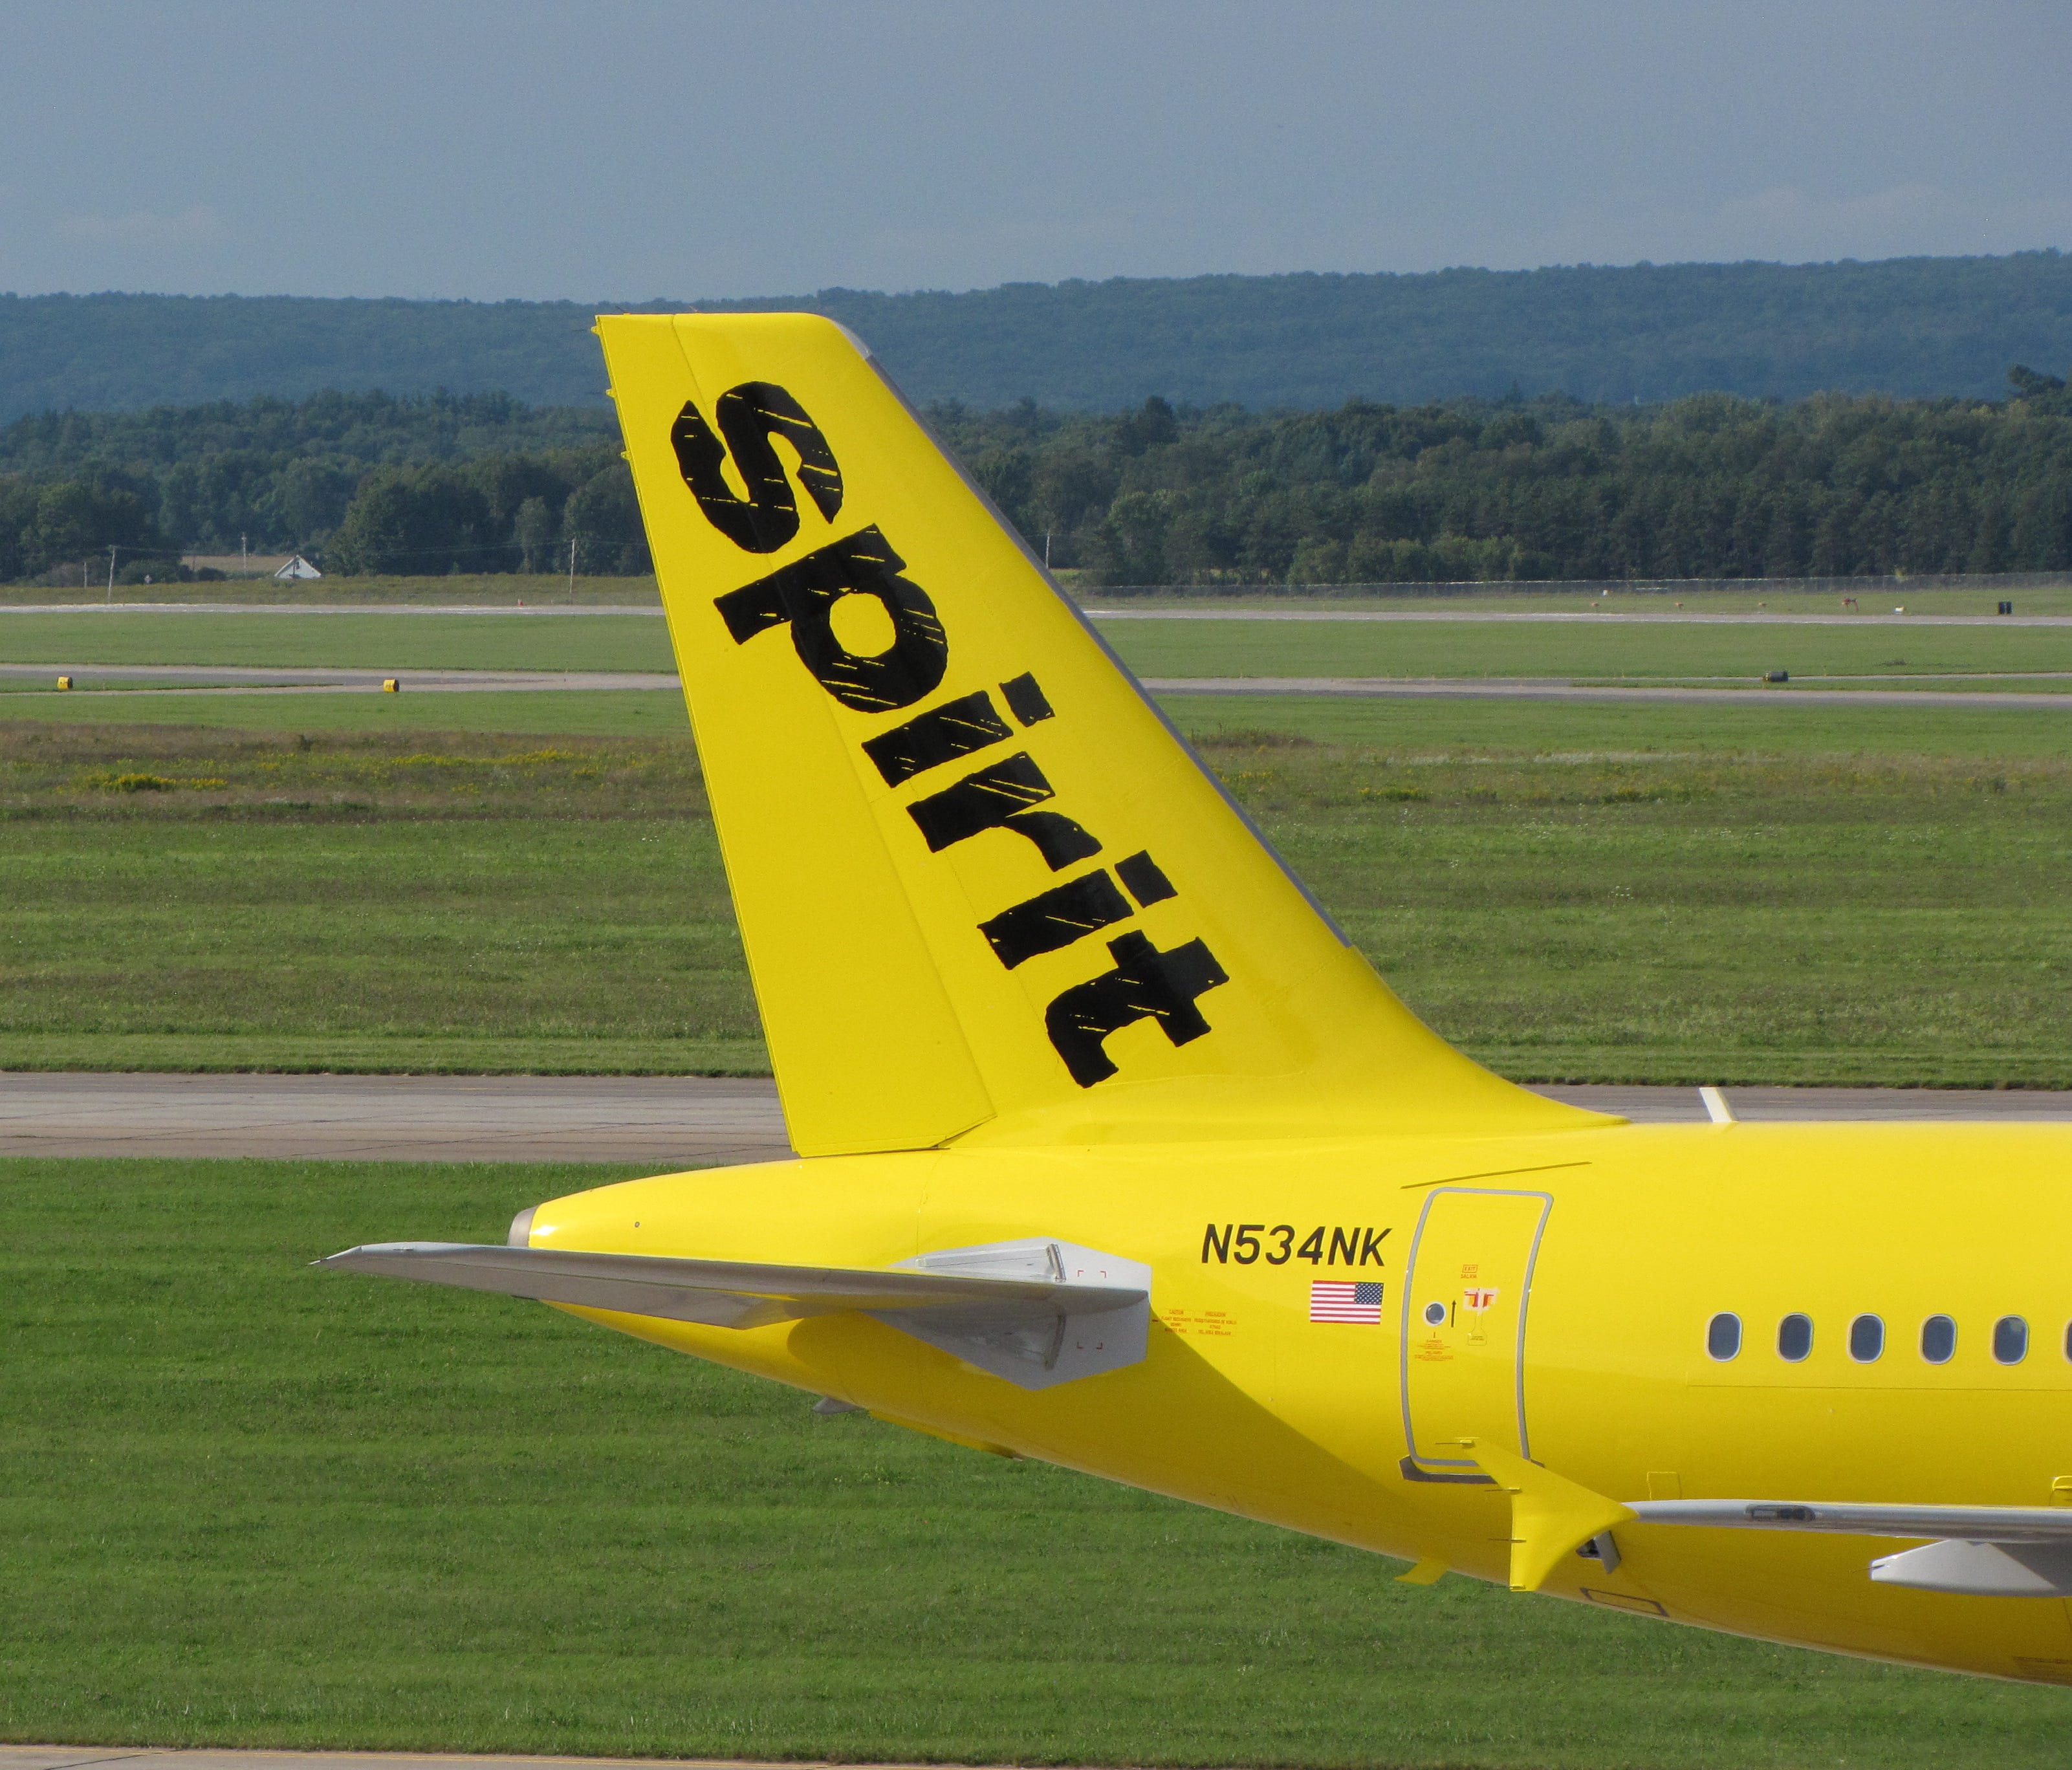 Spirit's first aircraft to get the airline's new paint scheme is rolled outside for photographs at the Premier Aviation Overhaul Center in Rome, N.Y., on Sept. 15, 2014.